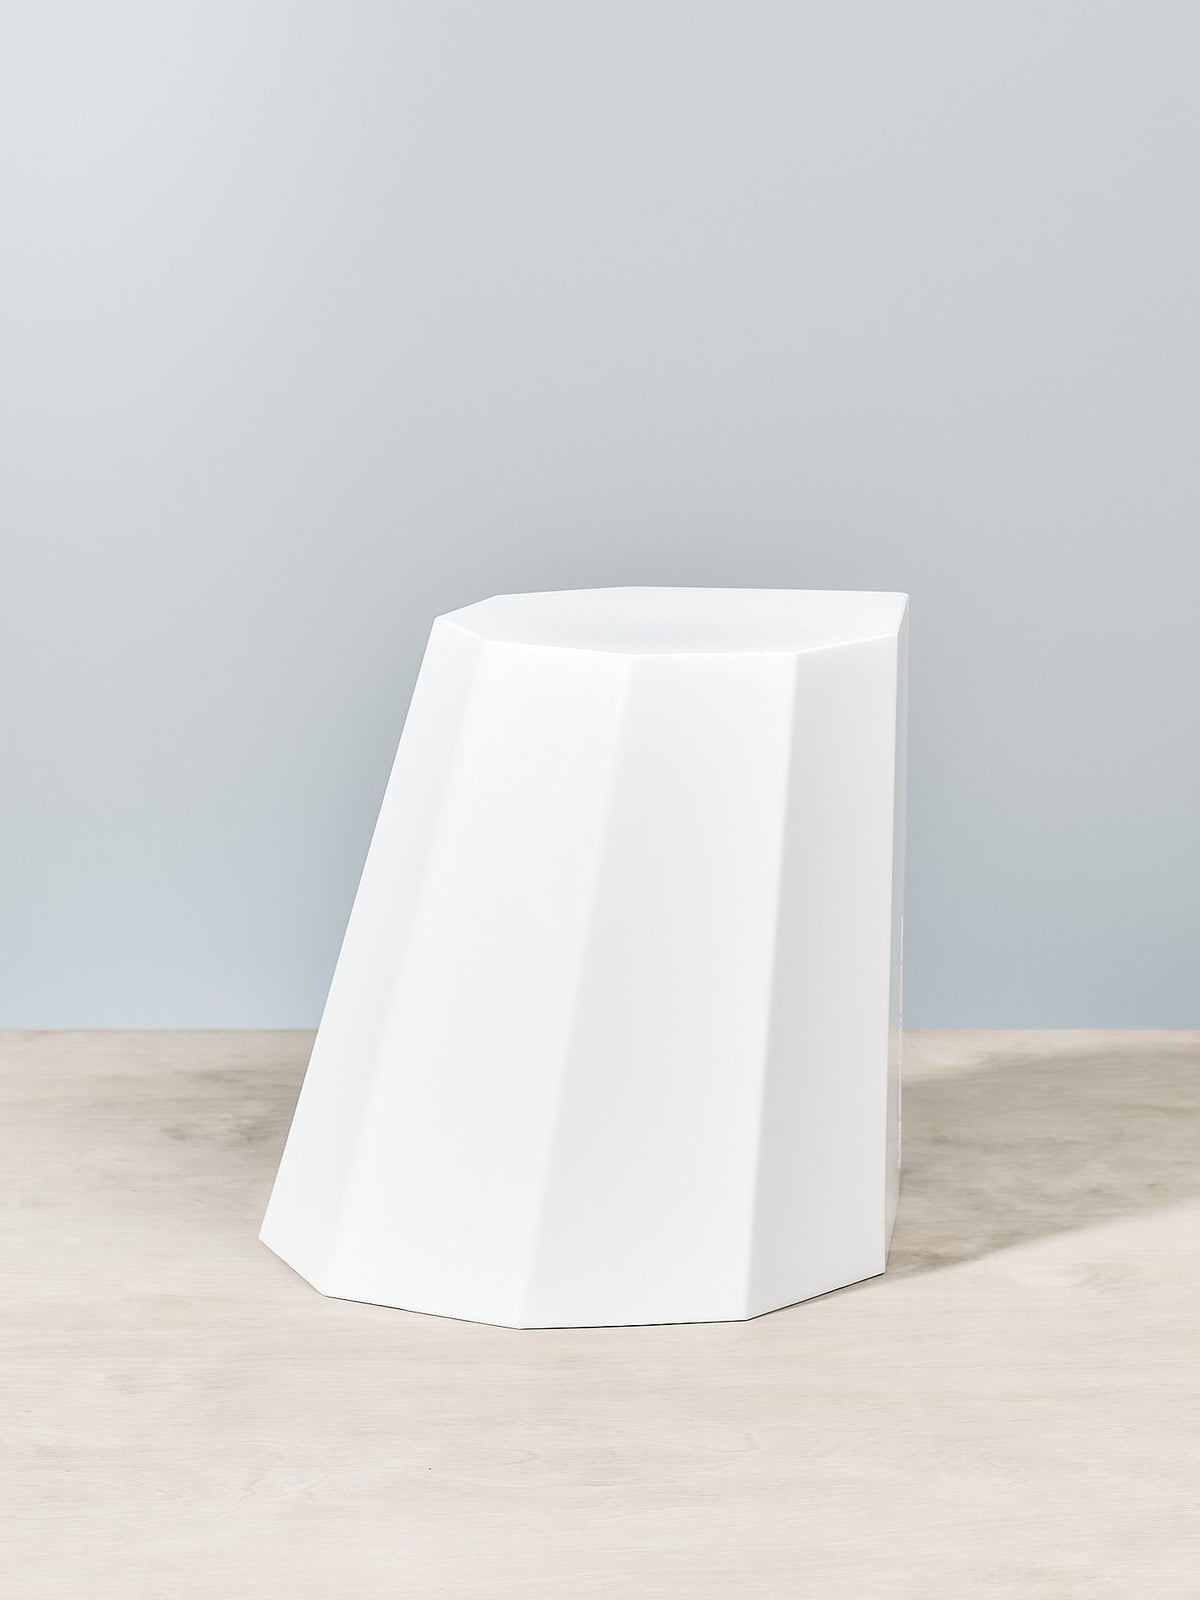 An Arnoldino Stool – Chalk by Martino Gamper on a wooden table.